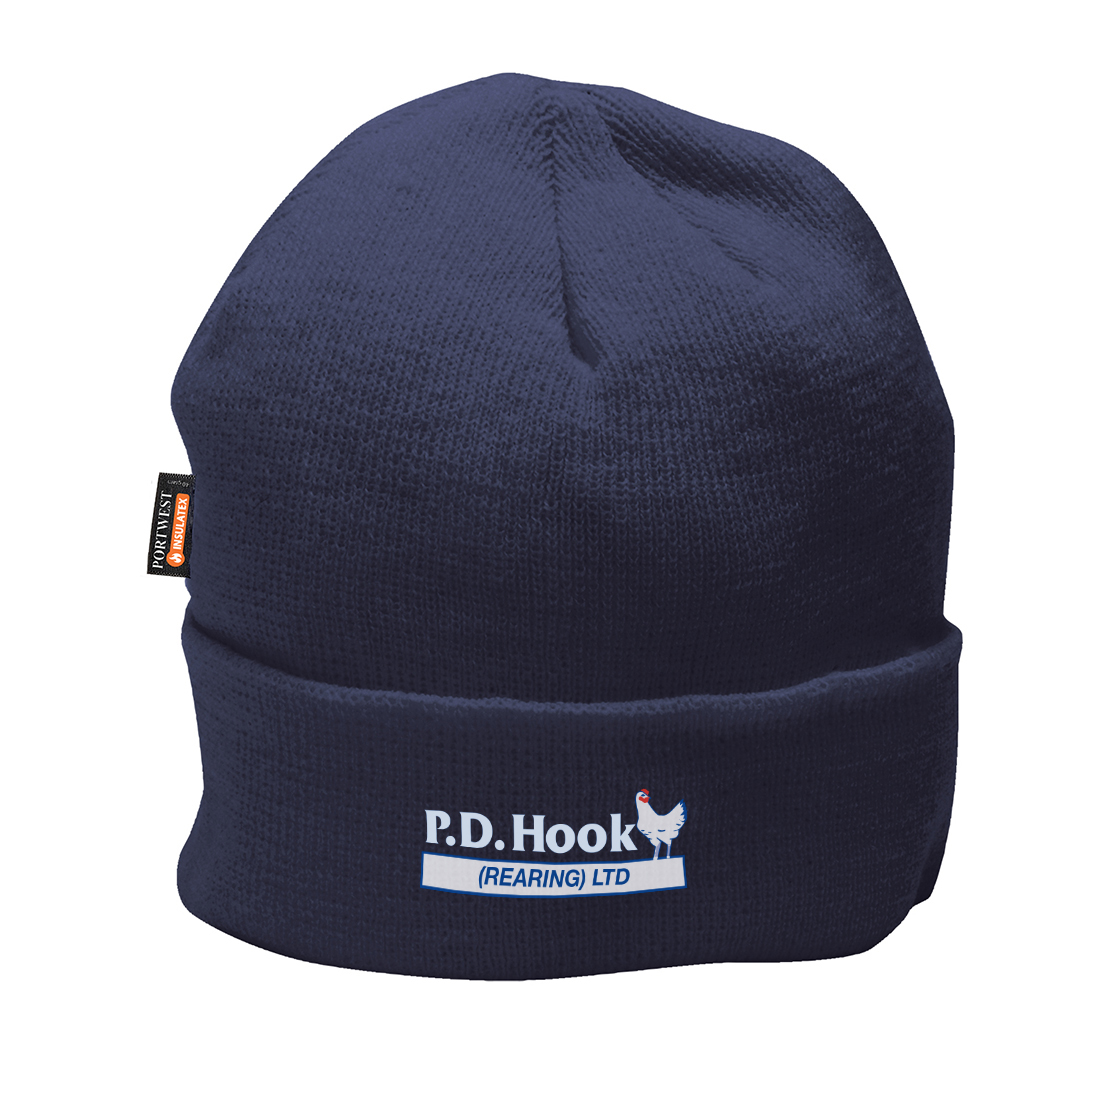 P D Hook (Rearing) Ltd - Beanie Hat, Navy, Embroidered